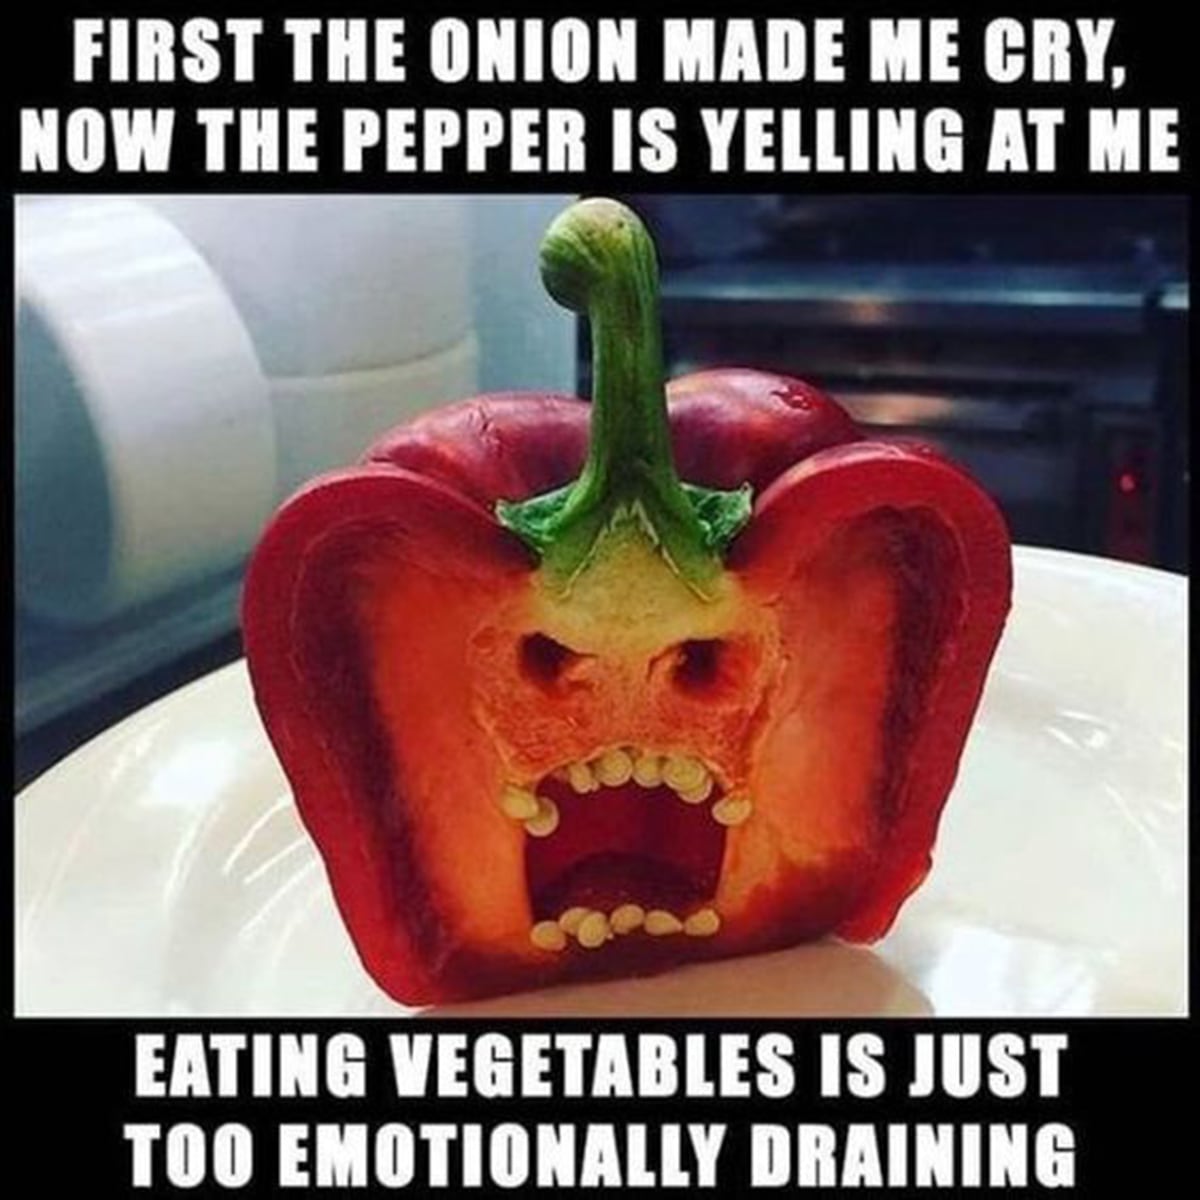 First the onion made me cry. Now the pepper is yelling at me. Eating vegetables is just too emotionally draining.